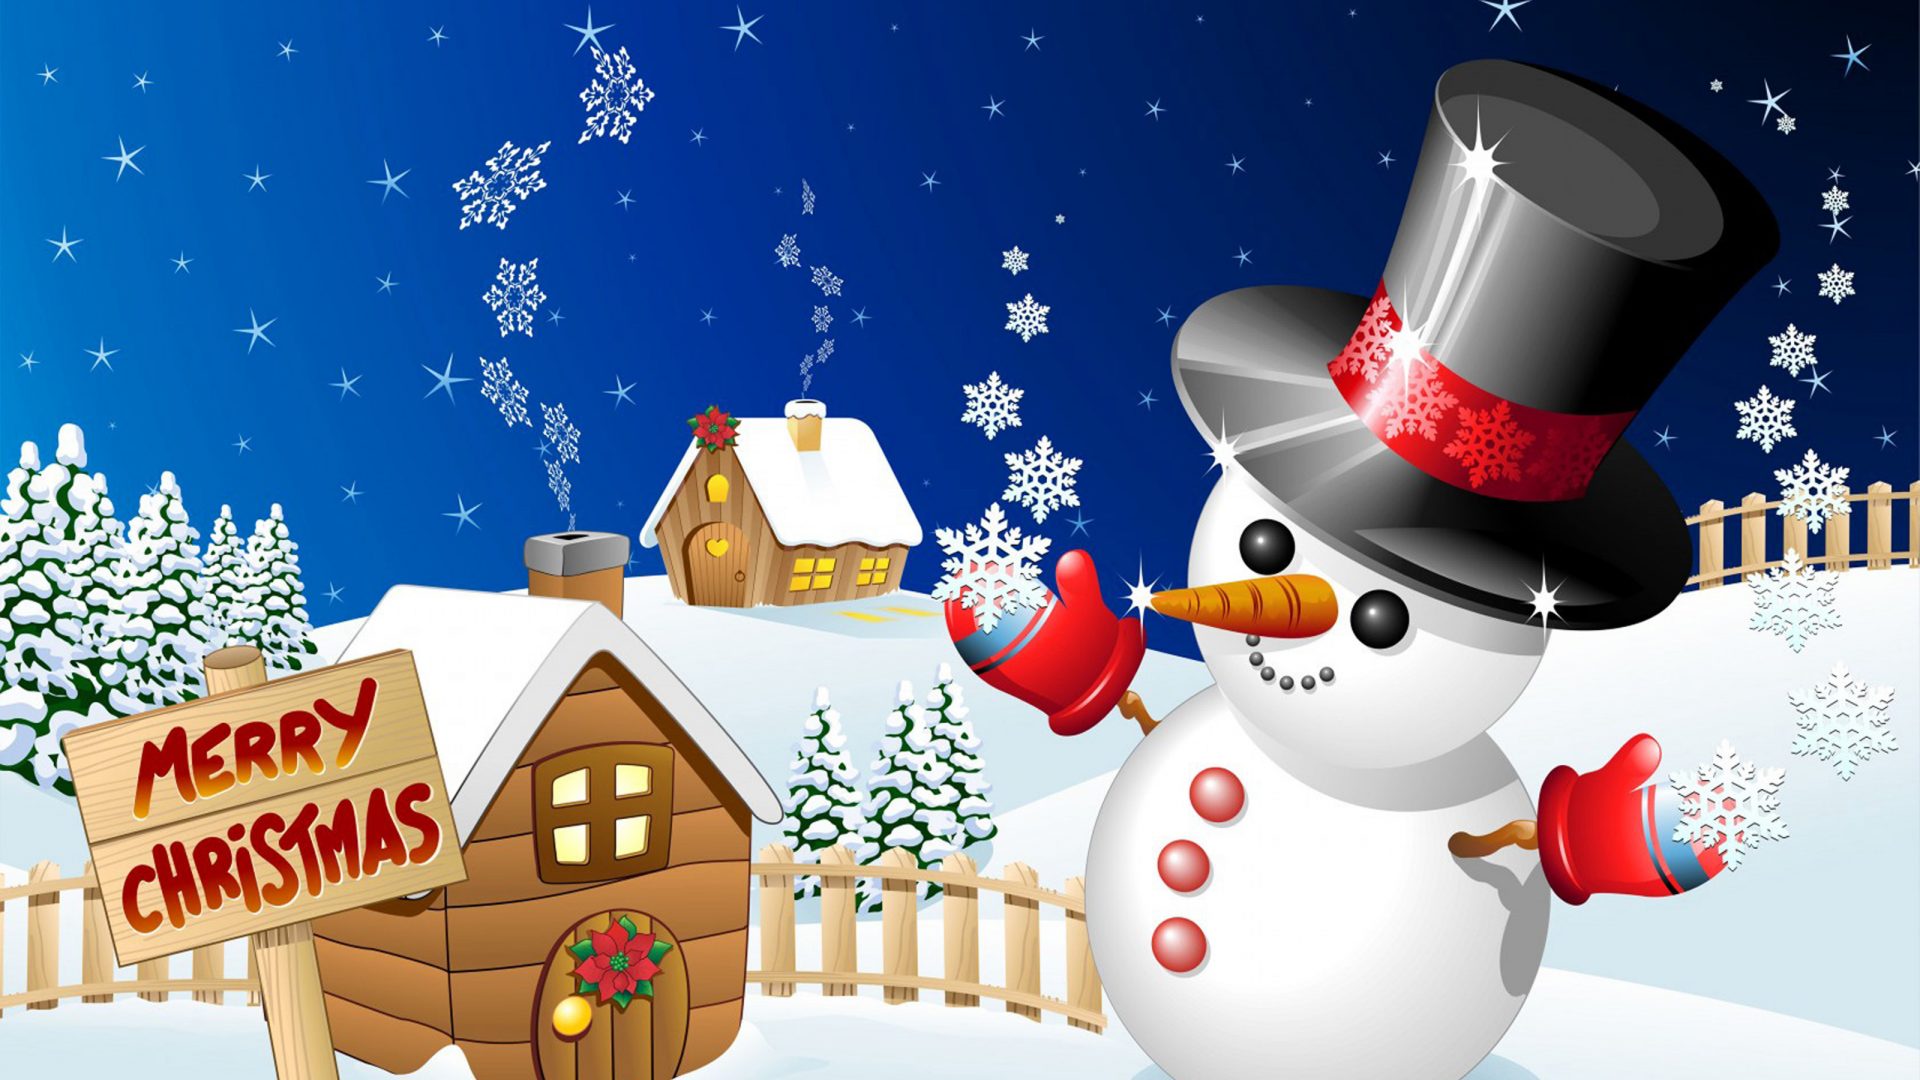 Merry Christmas Winter Snow Wood Houses With Snowman Desktop Hd Wallpapers For Mobile Phones Tablet And PC 2560x1600 : Wallpapers13